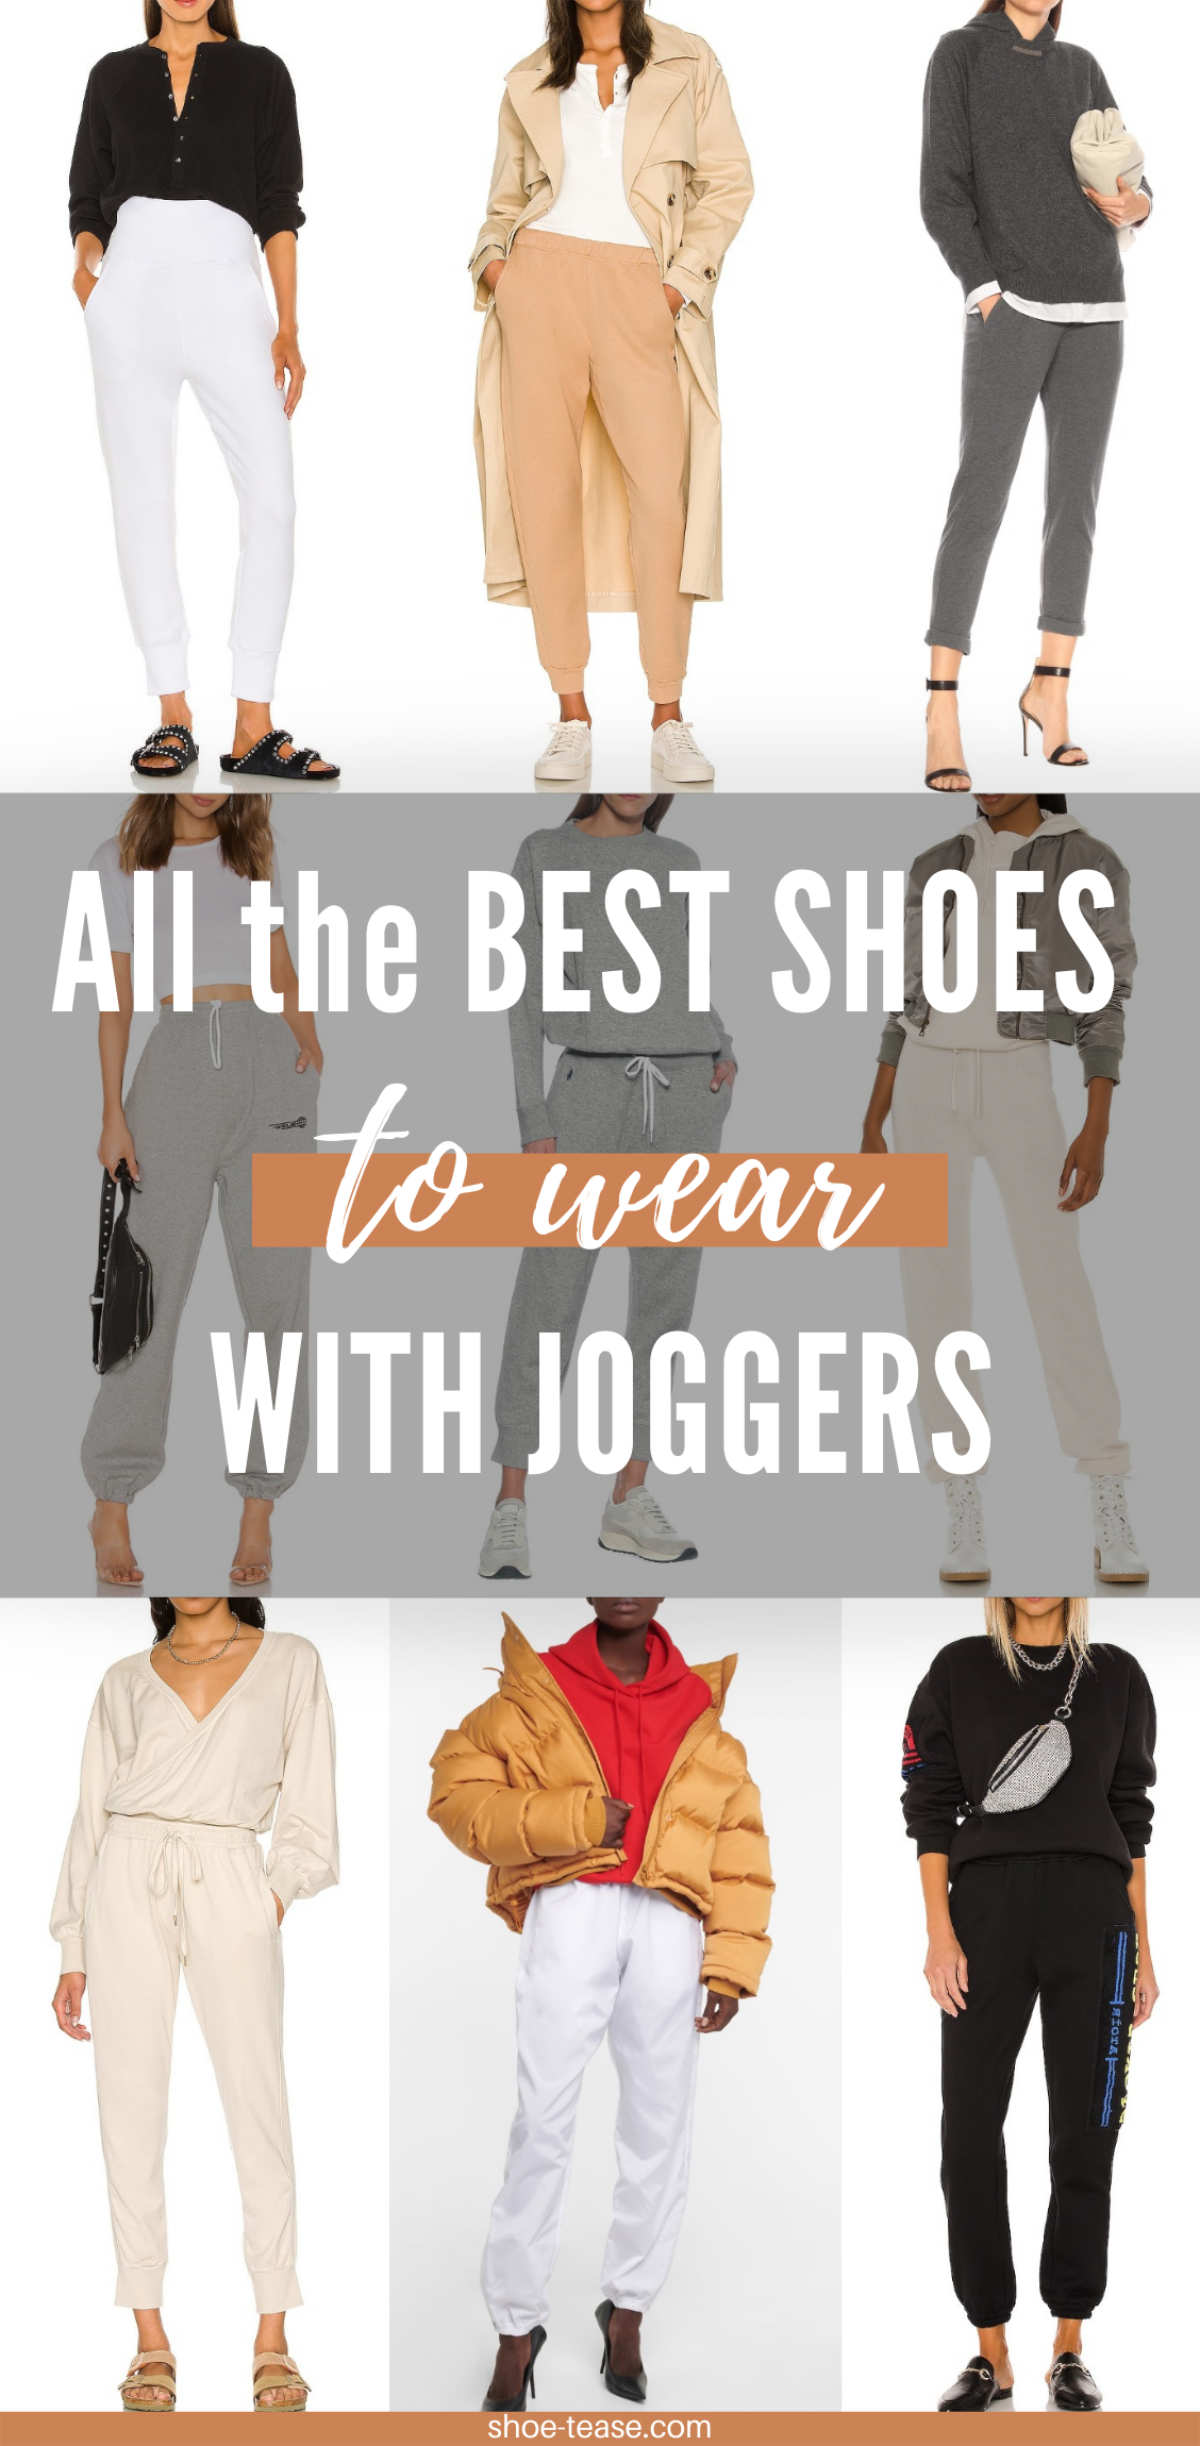 Text reading all the best shoes to wear with jogger over cropped view of 9 women wearing different joggers outfits.